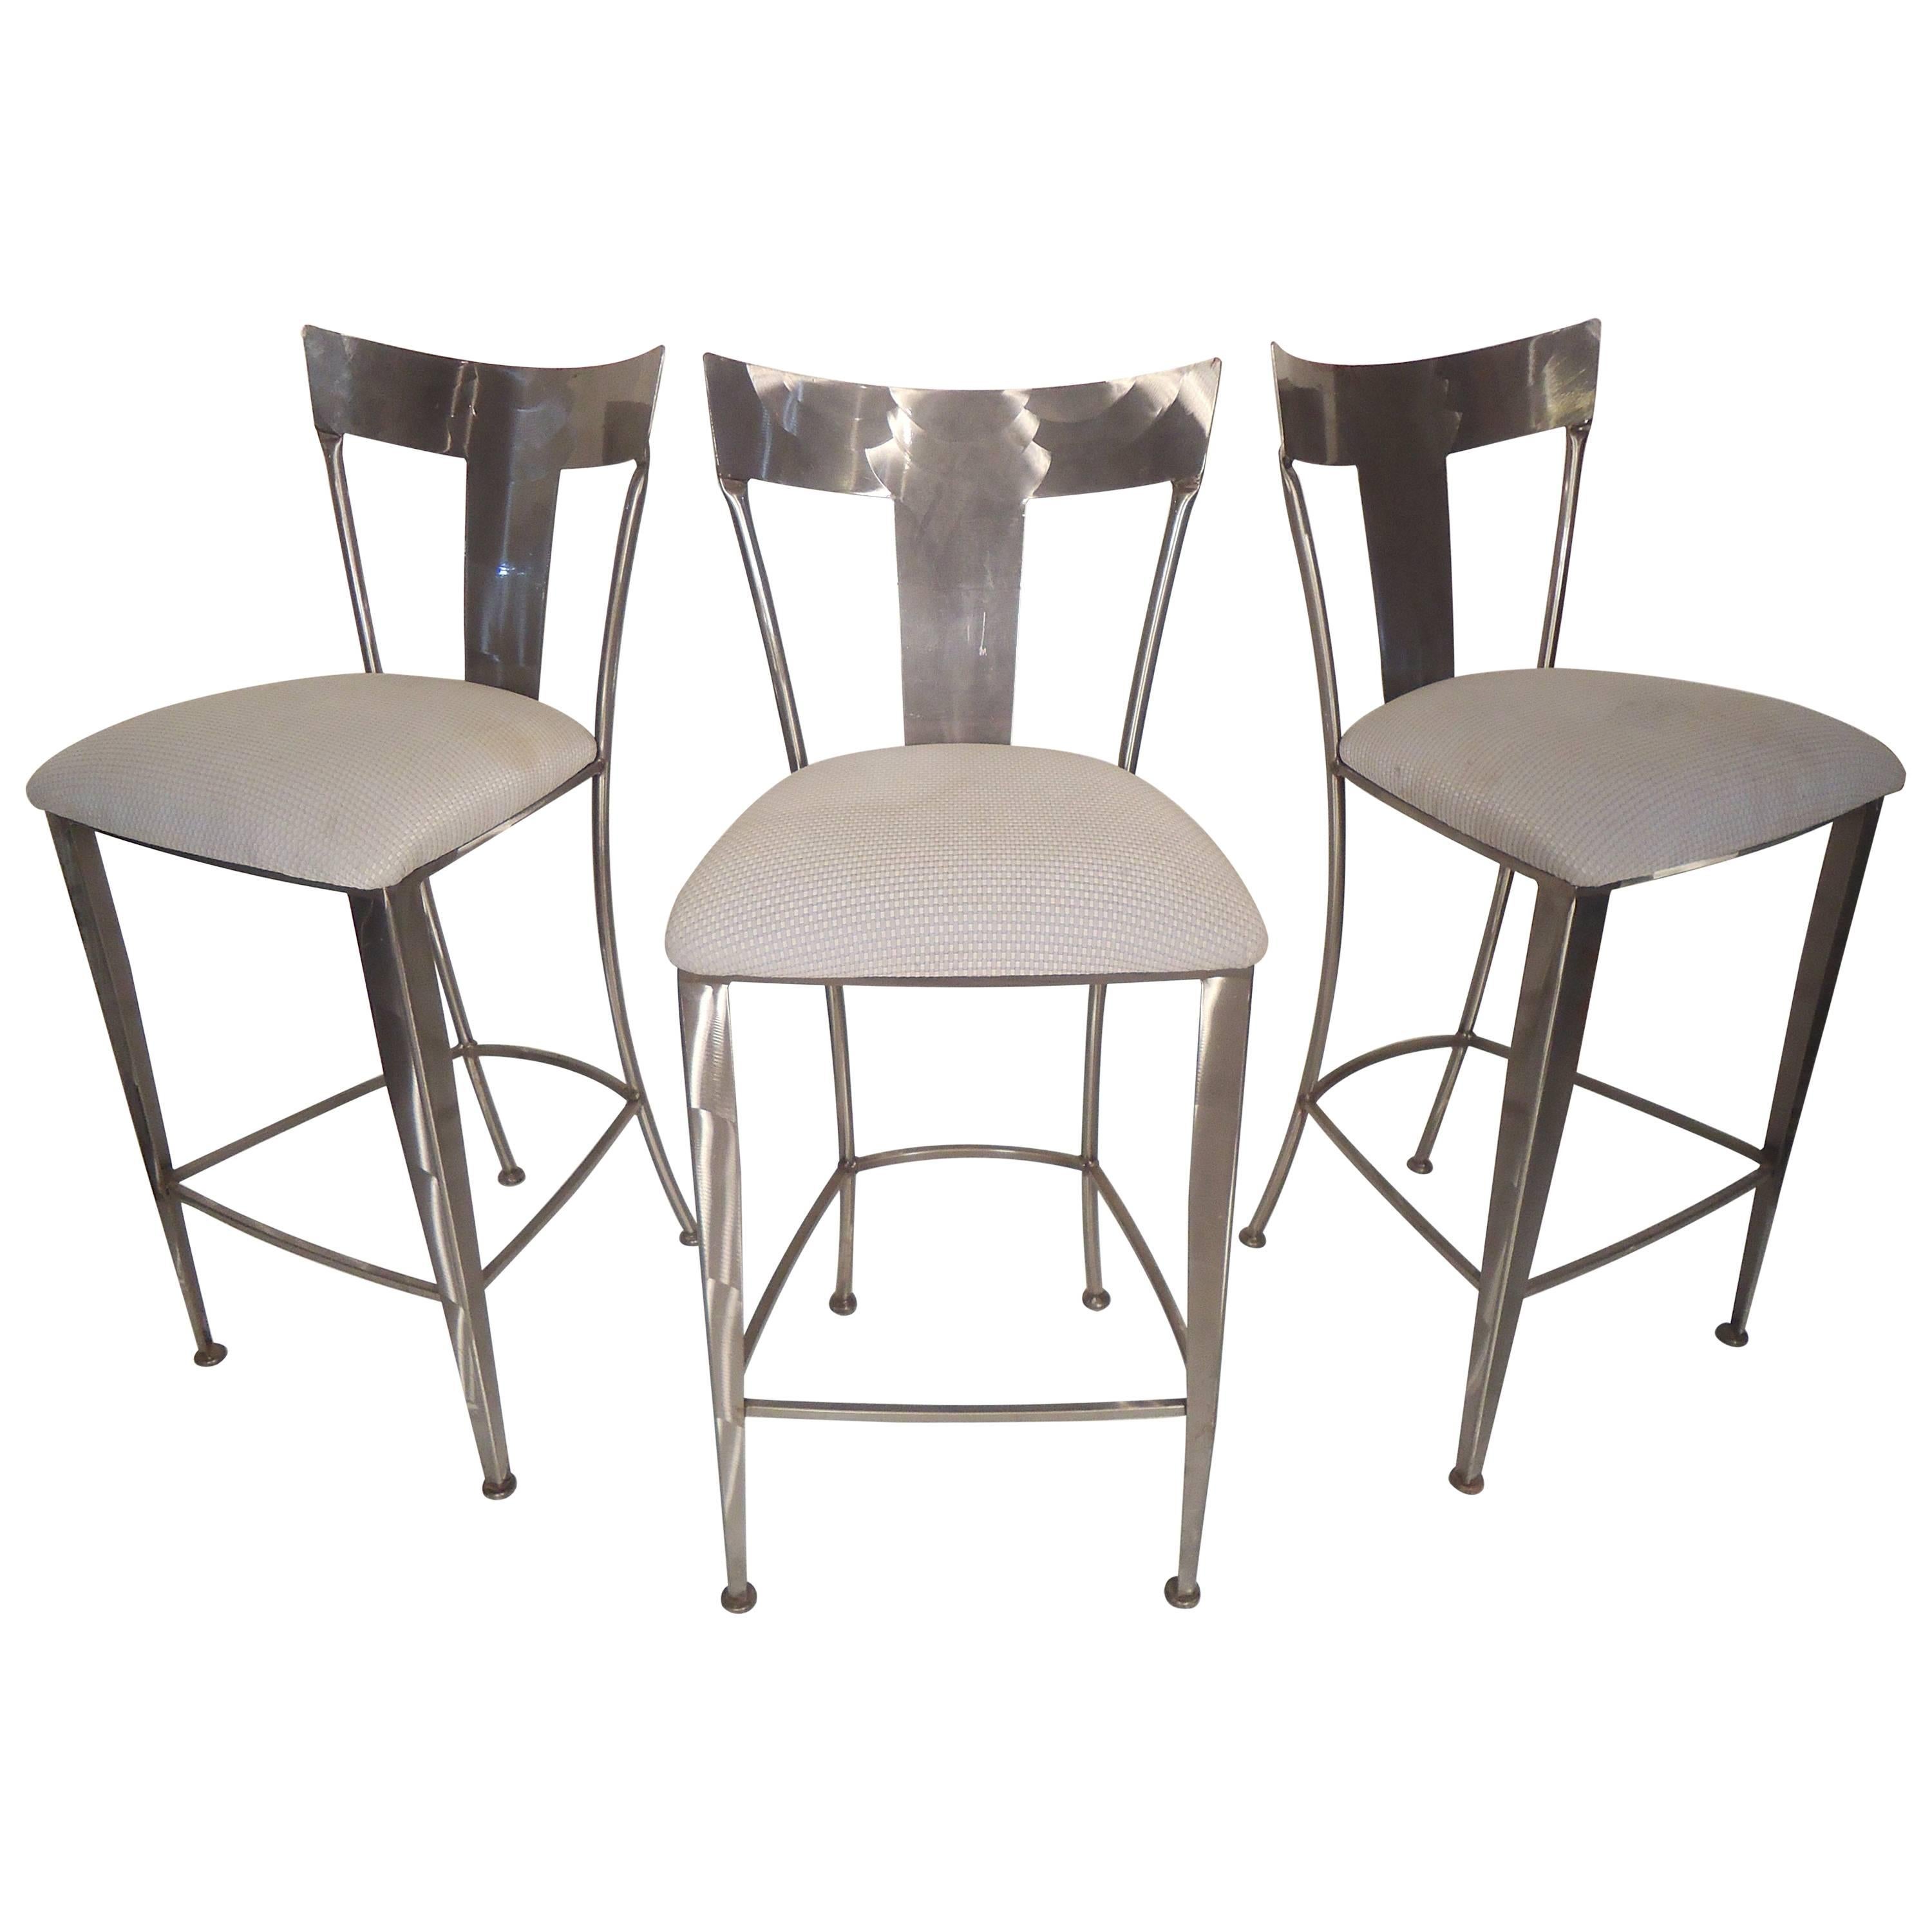 Set of Metal Stools For Sale